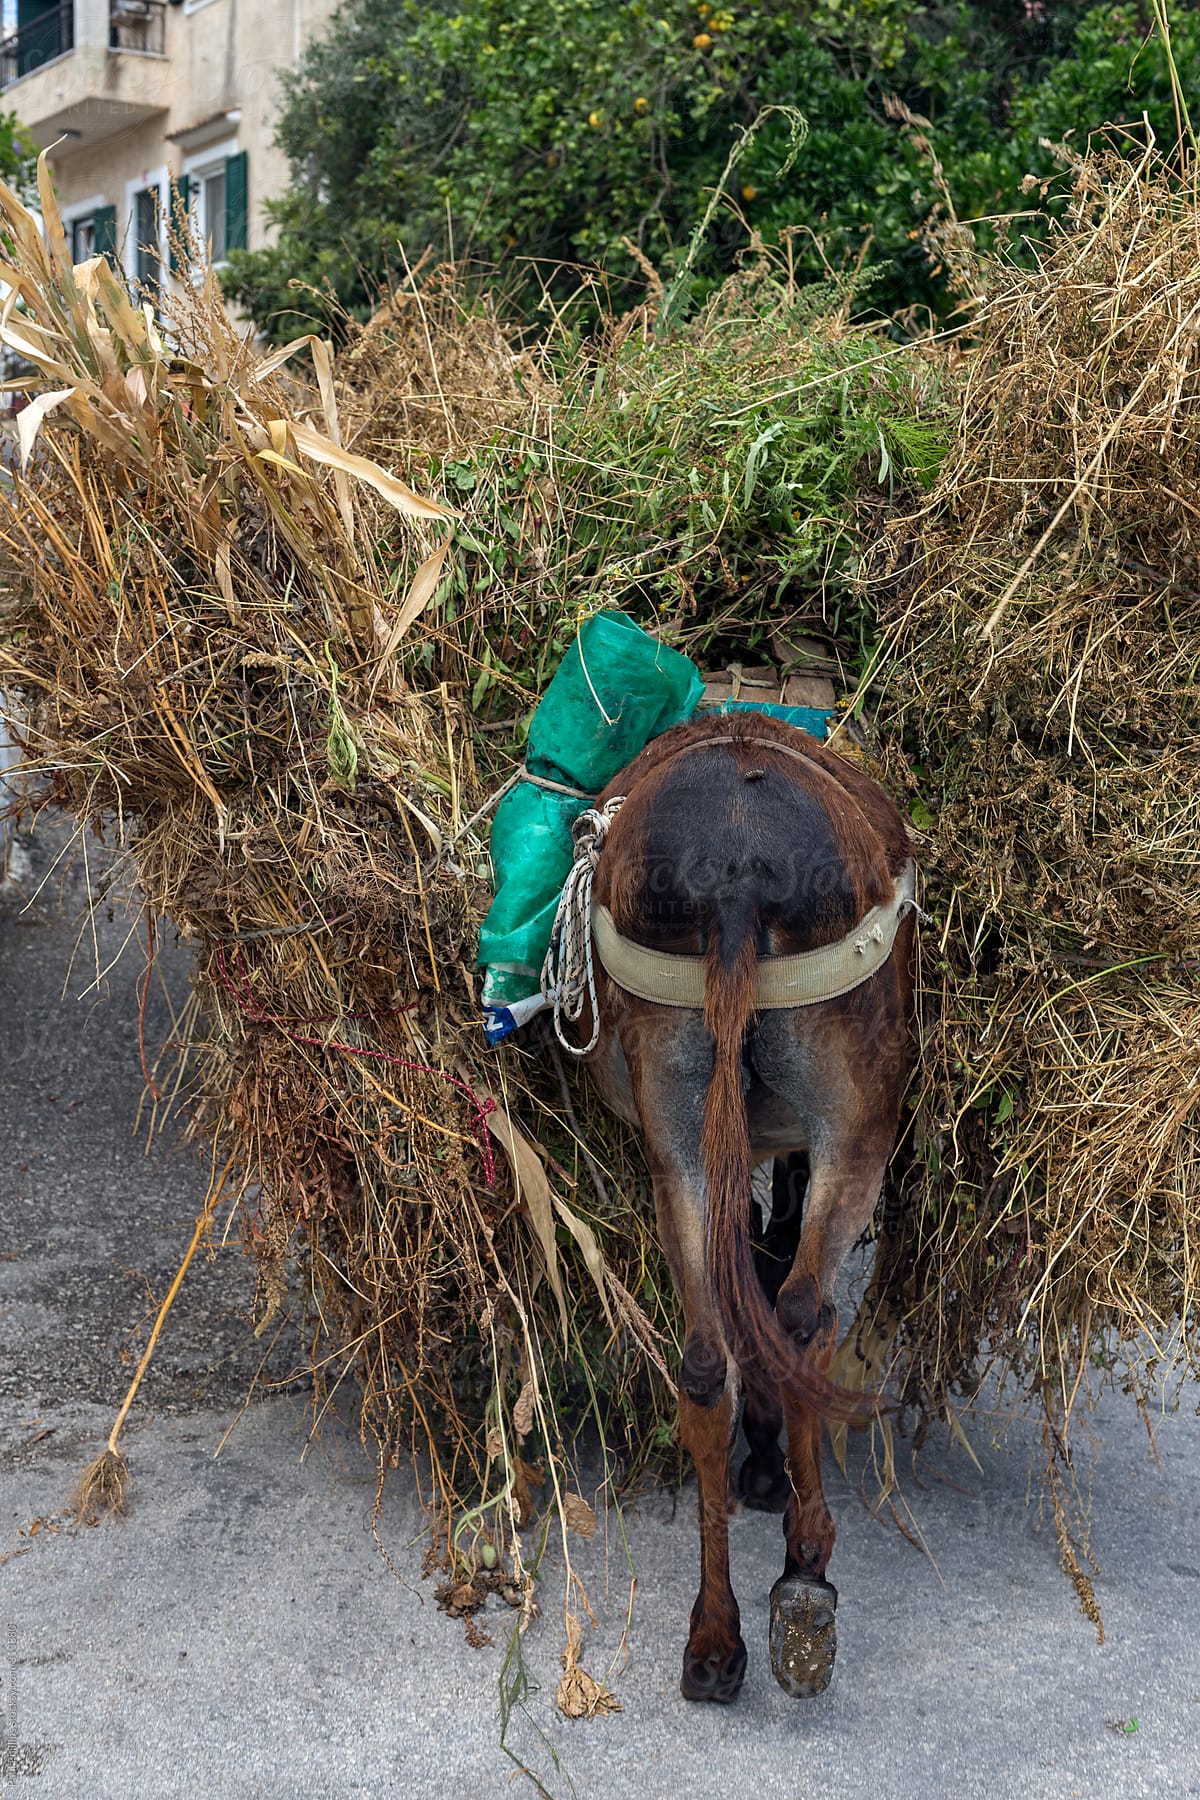 Rear of a packed donkey with hay walking through an old town in Corfu, Greece